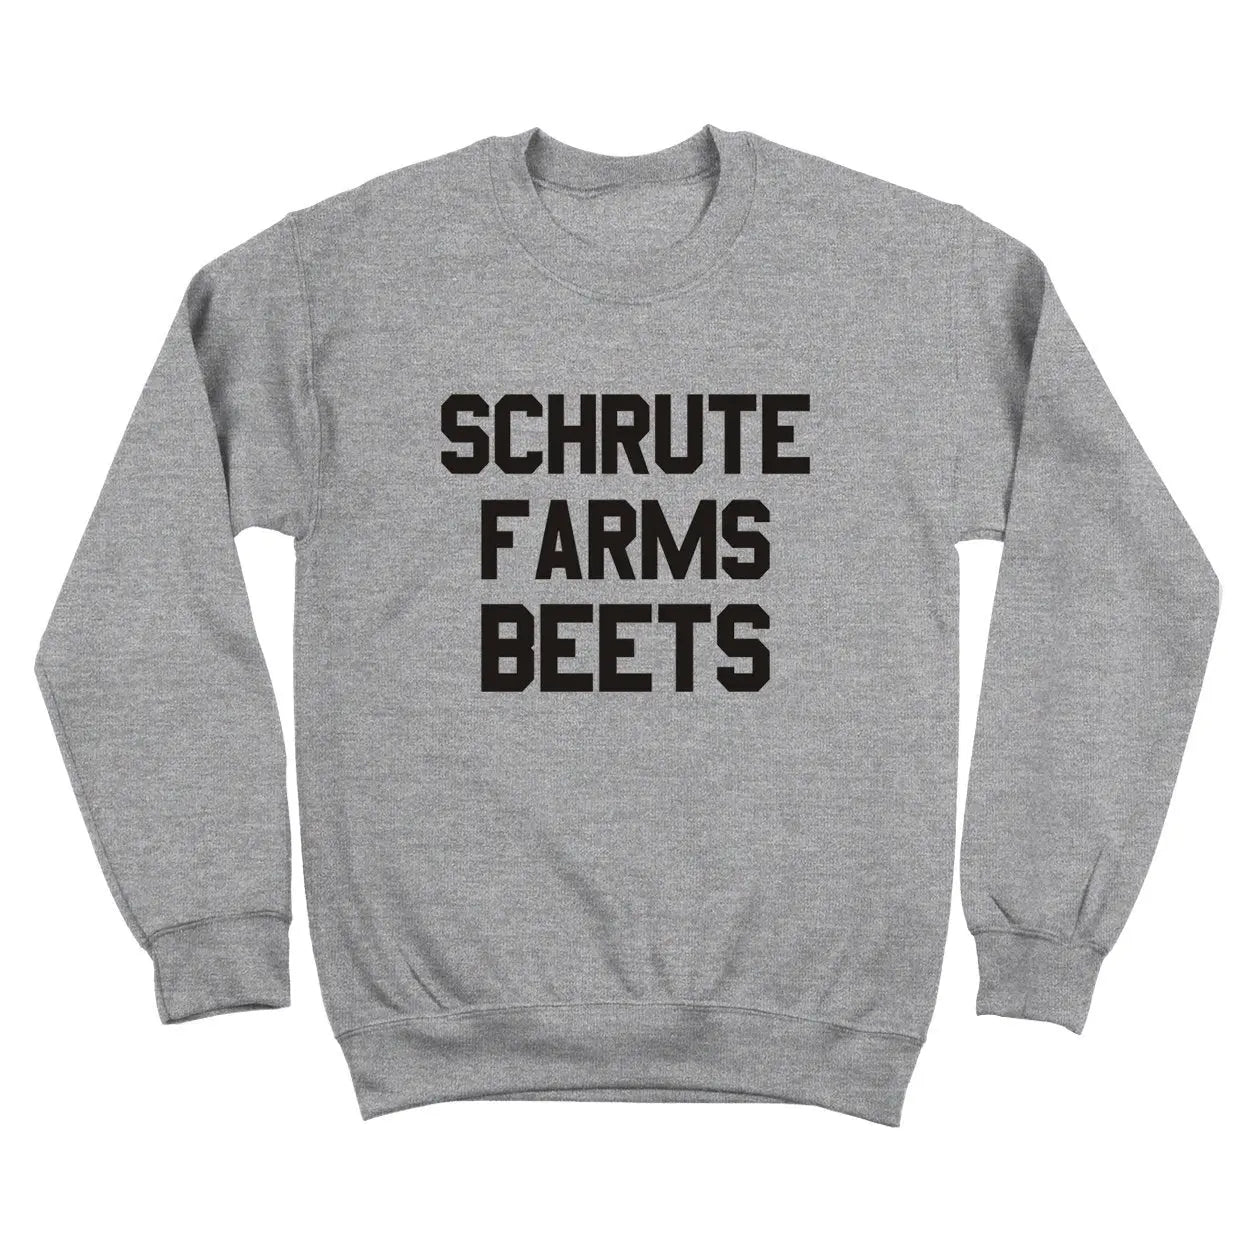 Schrute Farms Beets Tshirt - Donkey Tees